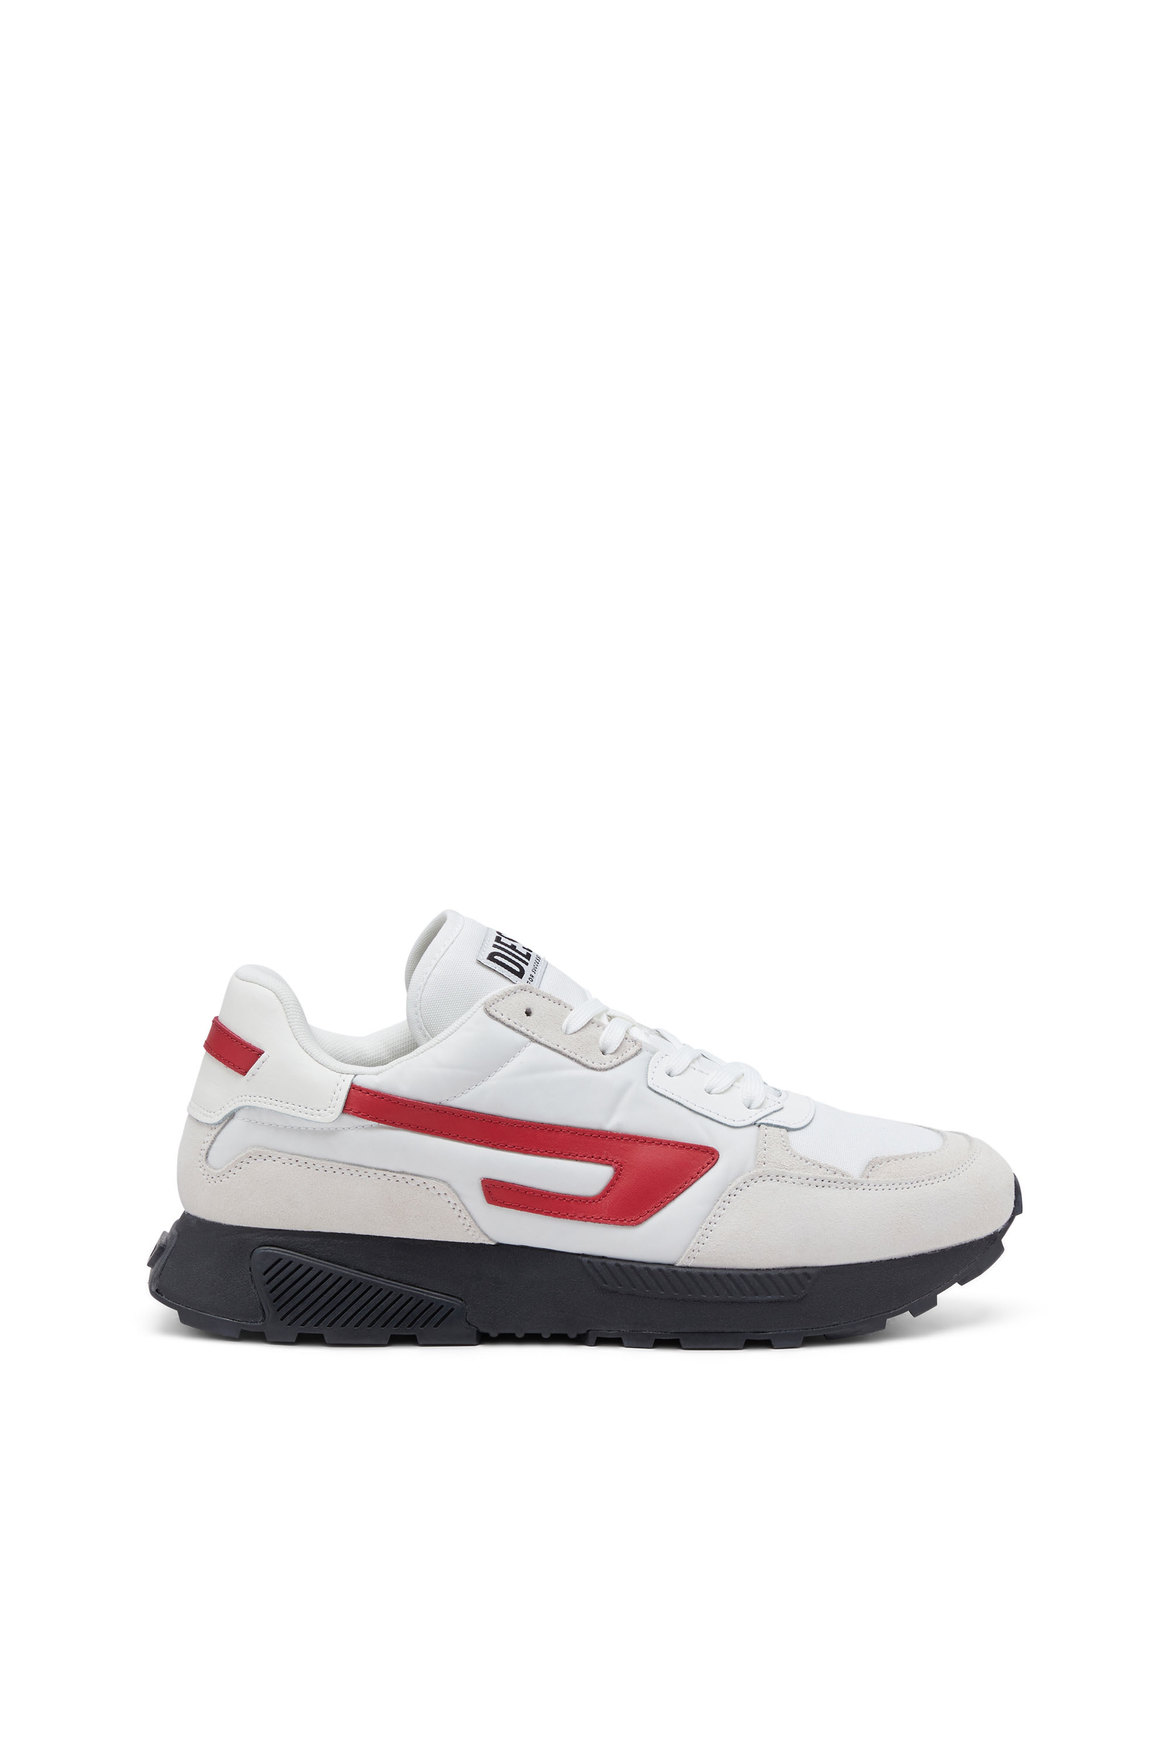 S-Tyche LL - Running sneakers with D logo | Diesel